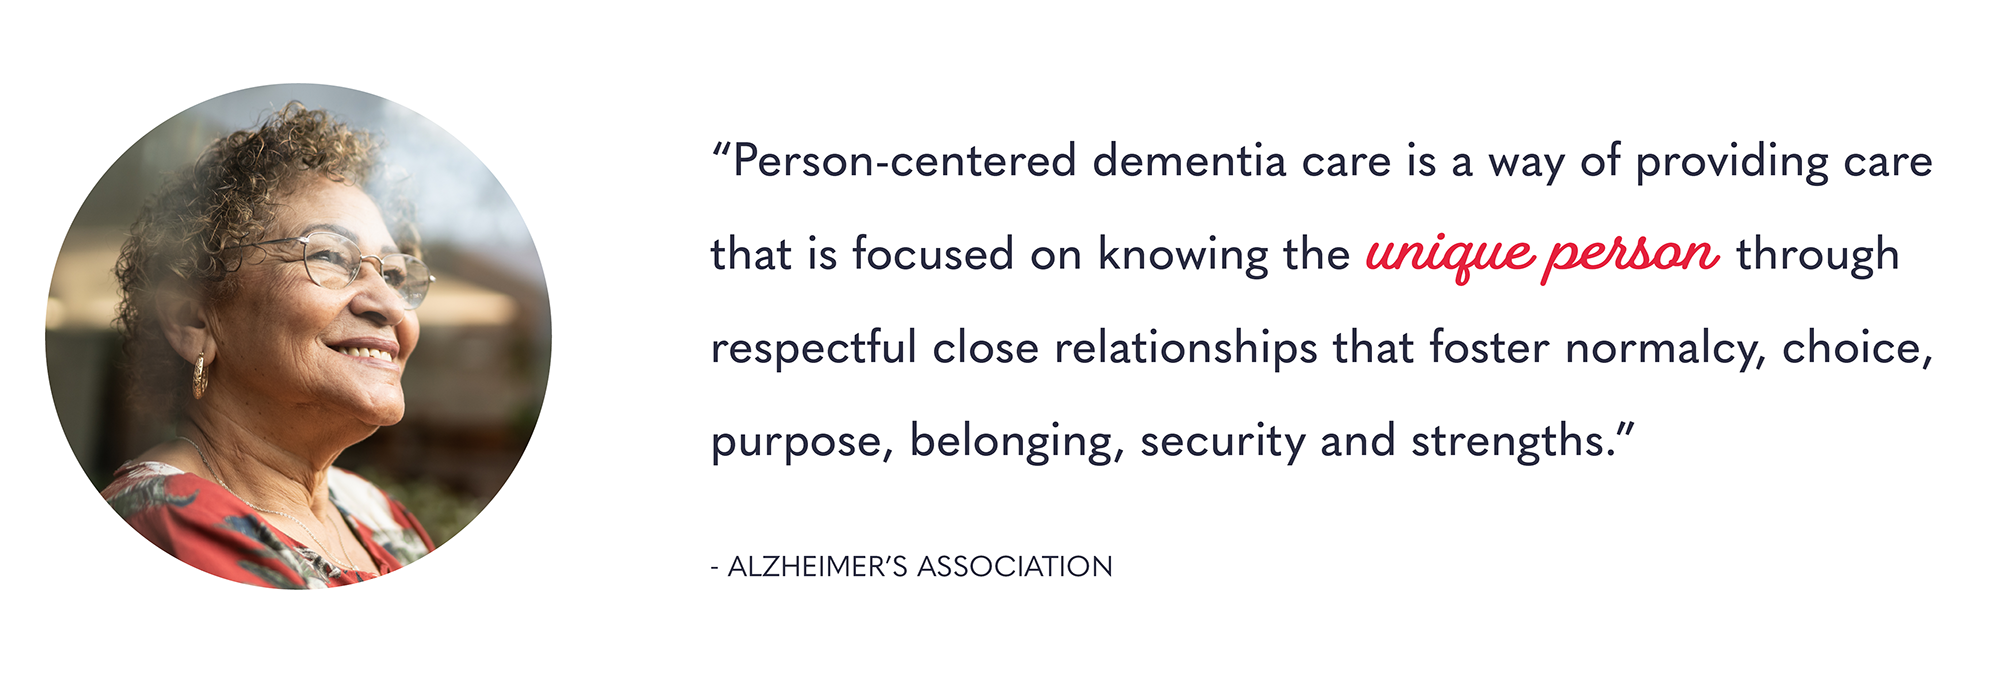 Person-centered dementia care is a way of providing care that is focused on knowing the unique person through respectful close relationships that foster normalcy, choice, purpose, belonging, security and strengths. – Alzheimer’s Association